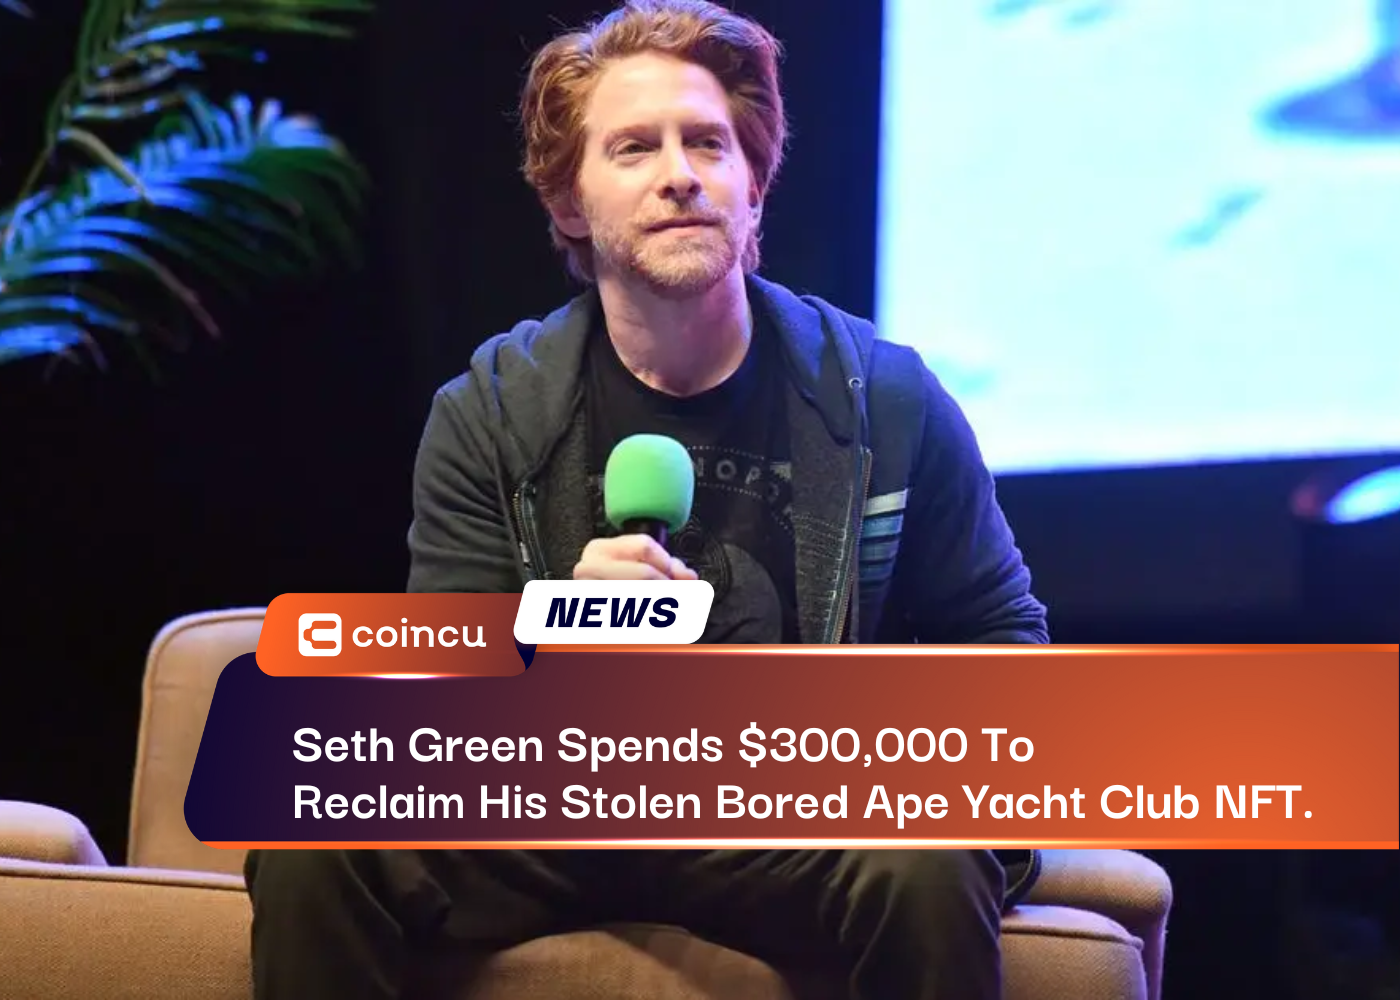 Seth Green Spends $300,000 To Reclaim His Stolen Bored Ape Yacht Club NFT.